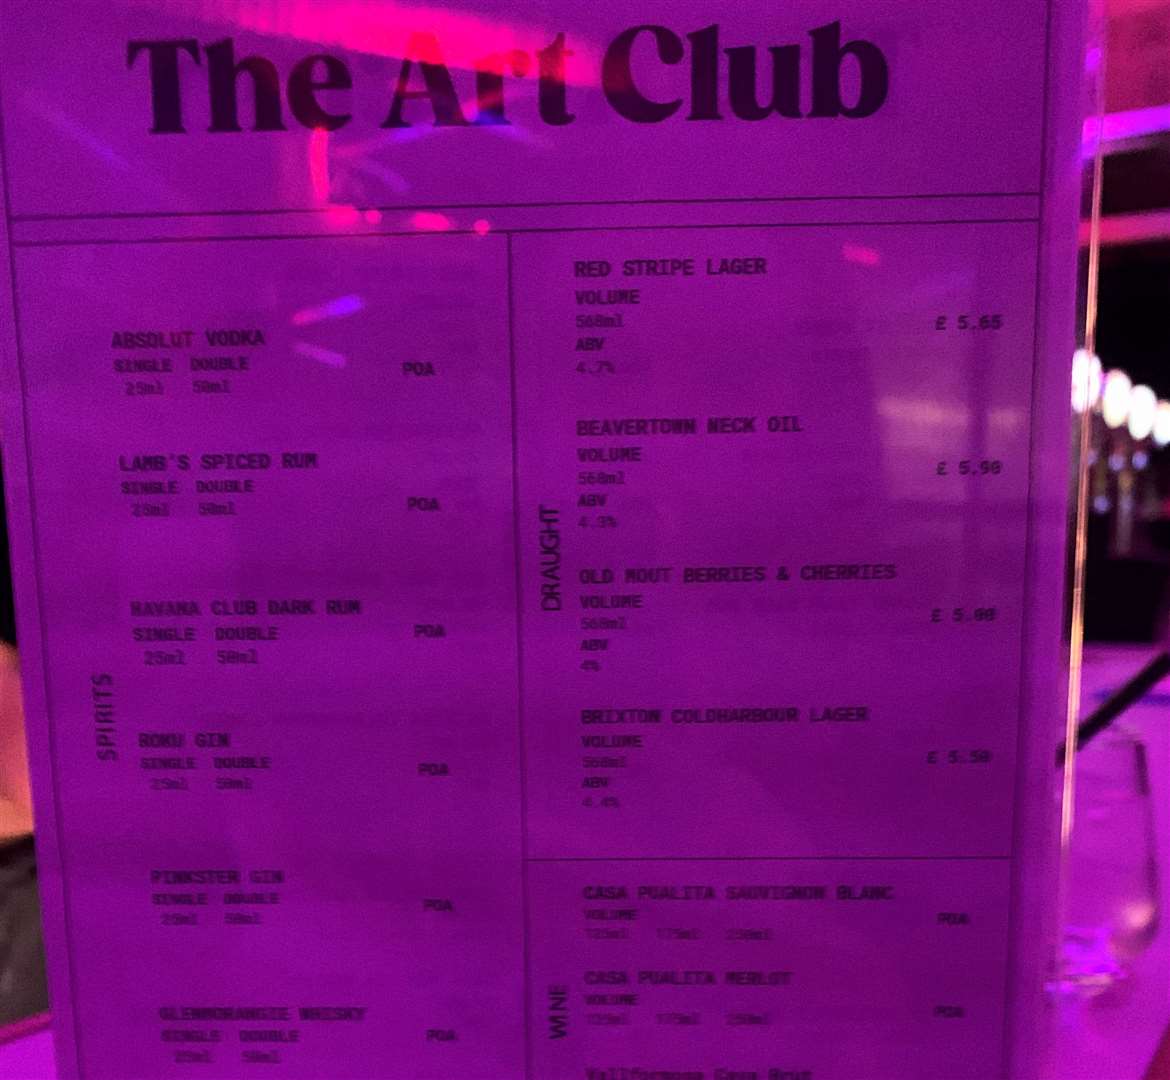 Most of the prices on the menu were listed as 'POA'